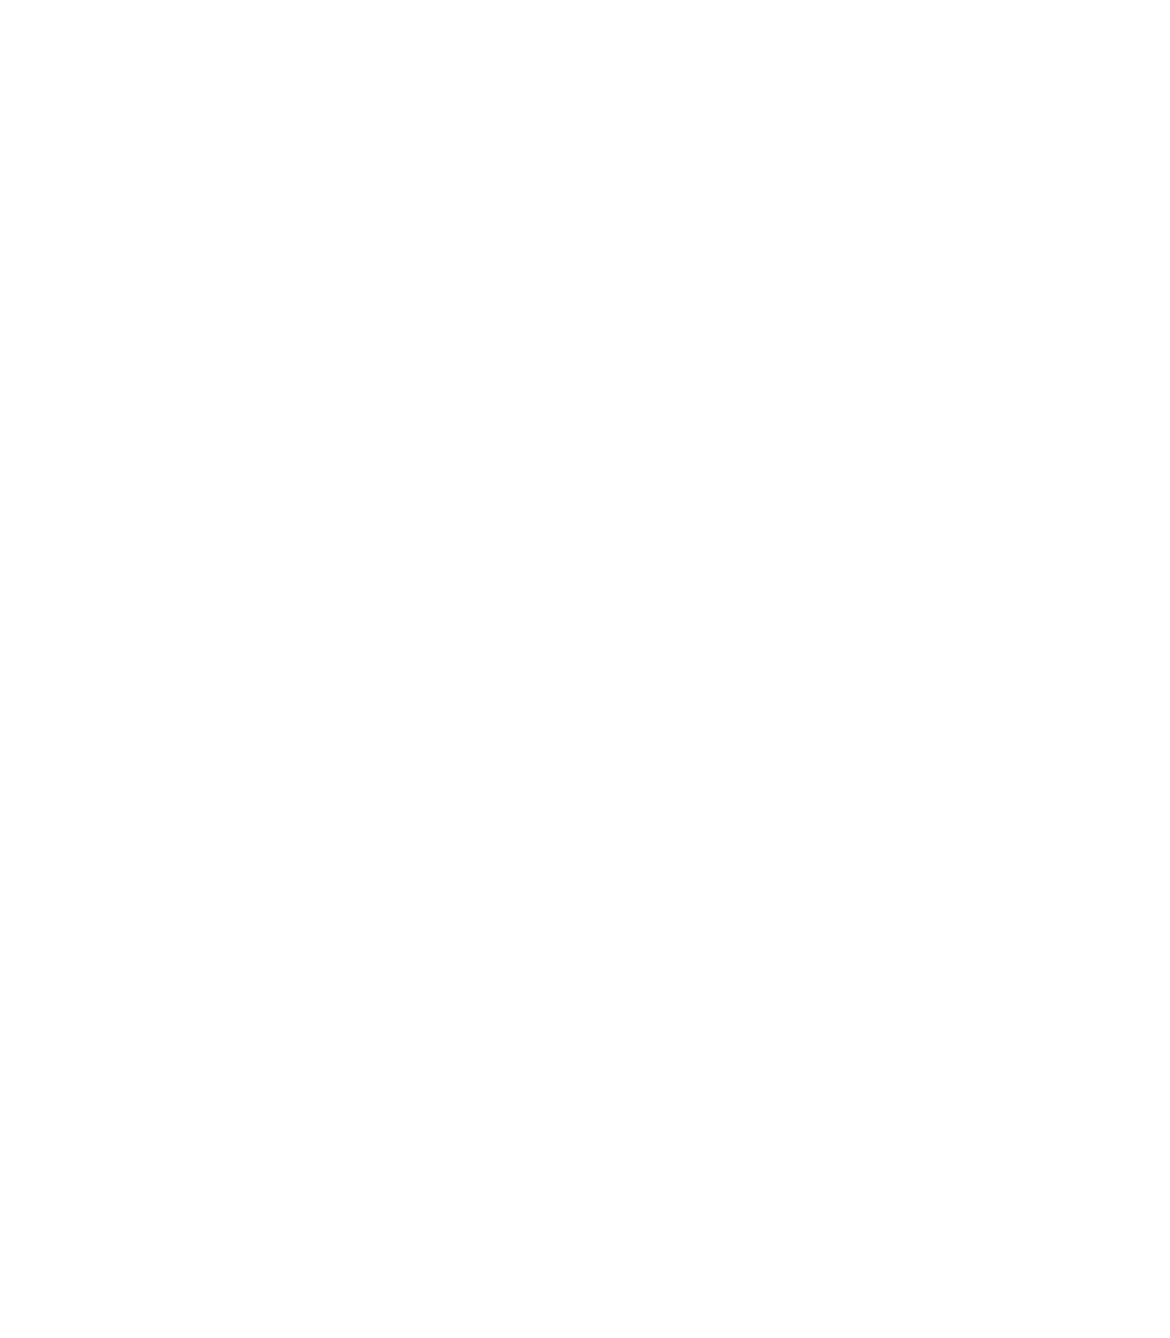 An illustration depicting a food plate served beneath a bell, which a waiter lifts to reveal a Rubik's cube illustration symbolizing our diverse skillset and expertise across various areas that you can benefit from.